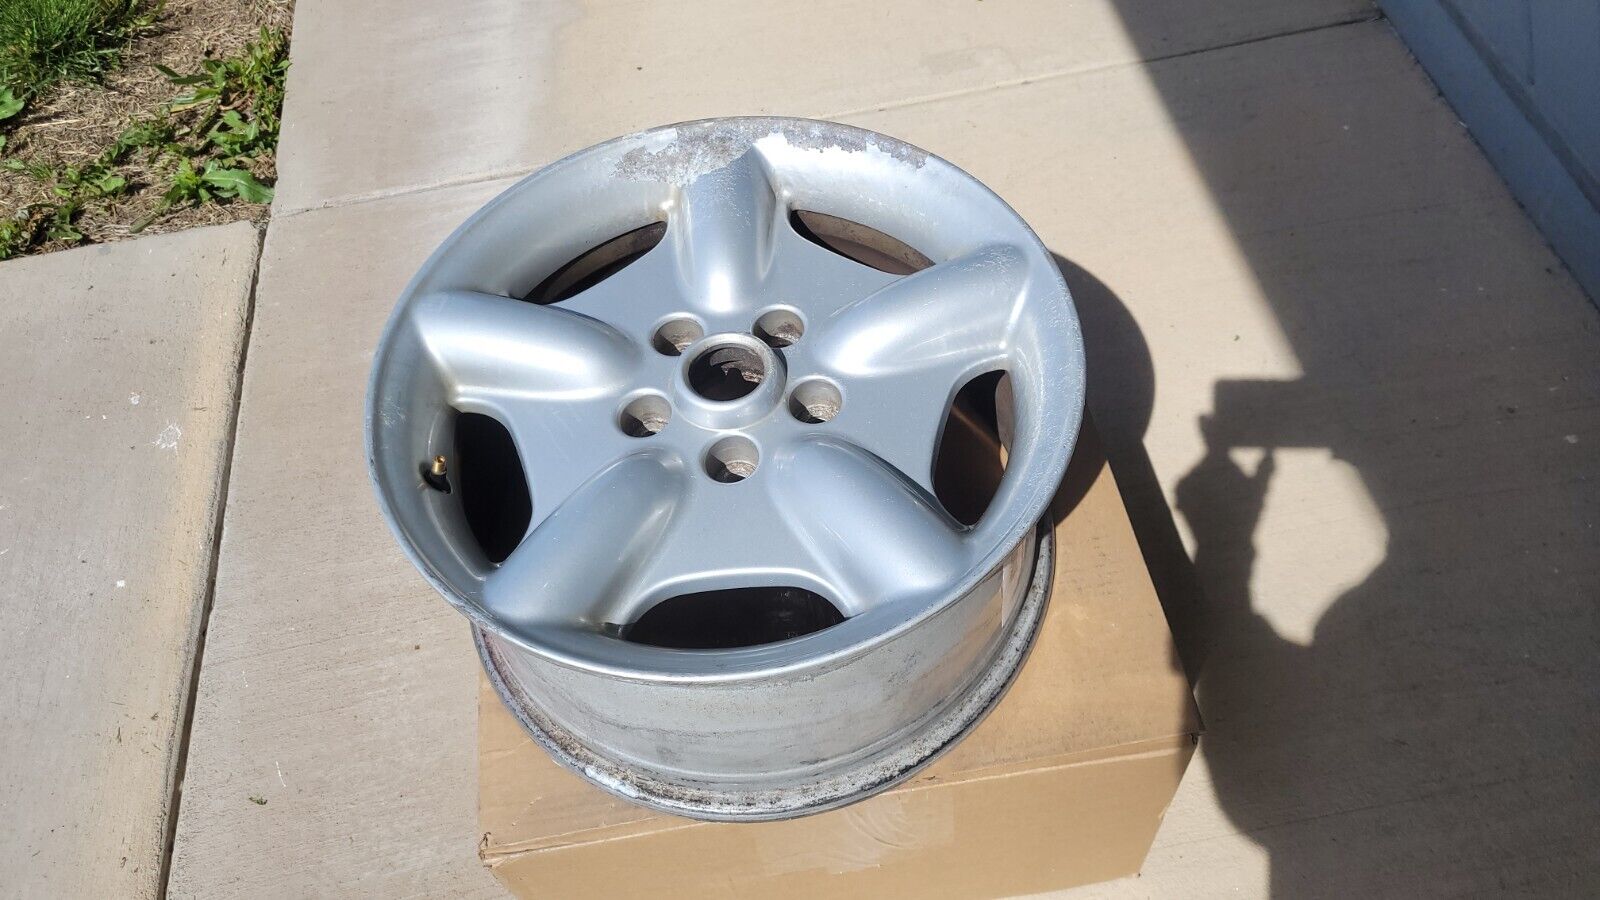 97-99 Jaguar XK8 XKR Alloy Wheel - GREAT AS A FULL-SIZE SPARE